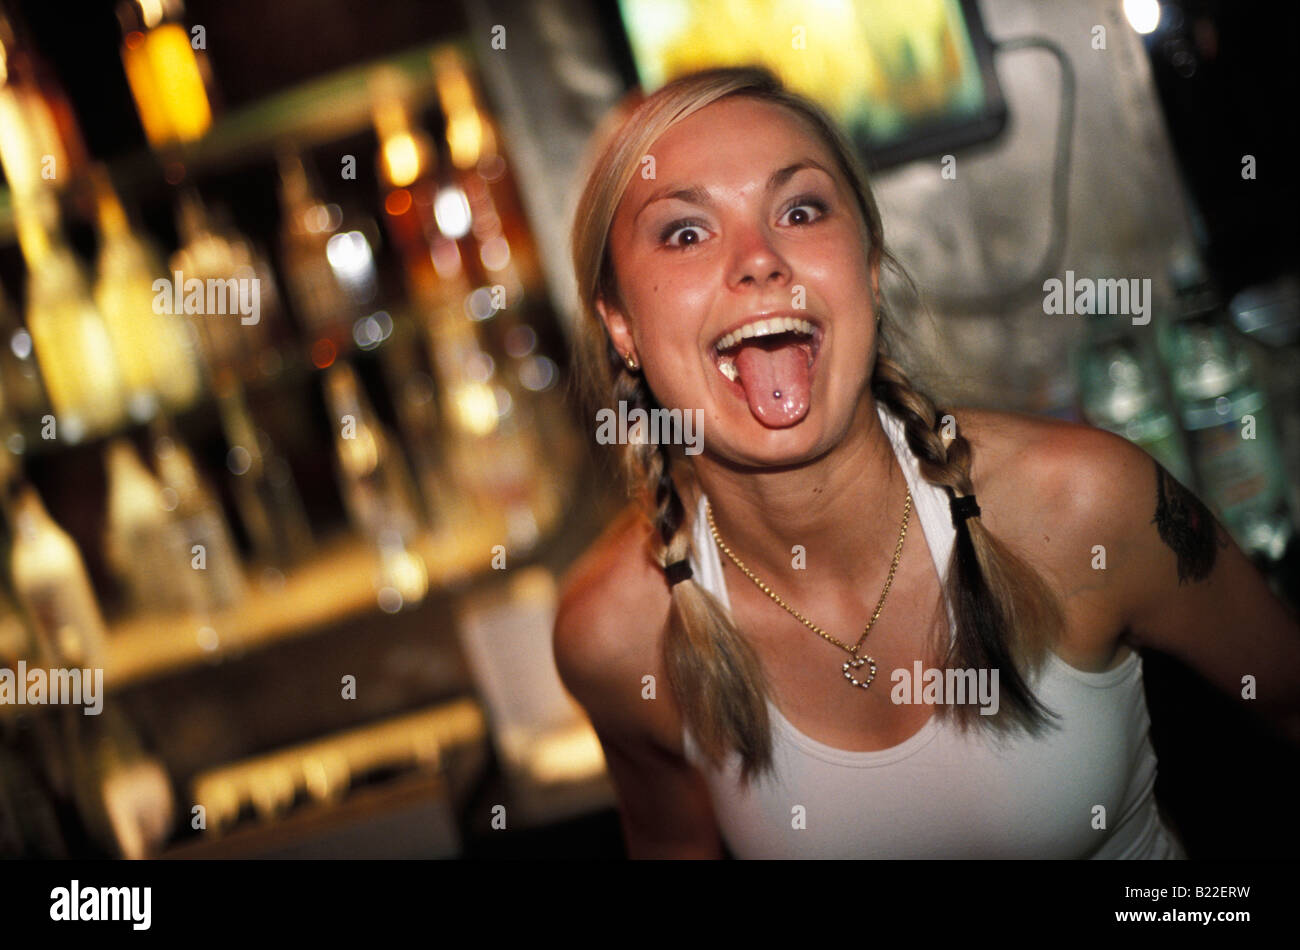 A young woman in a bar showing off her pierced tongue in Ground Zero Club Warsaw Poland Stock Photo